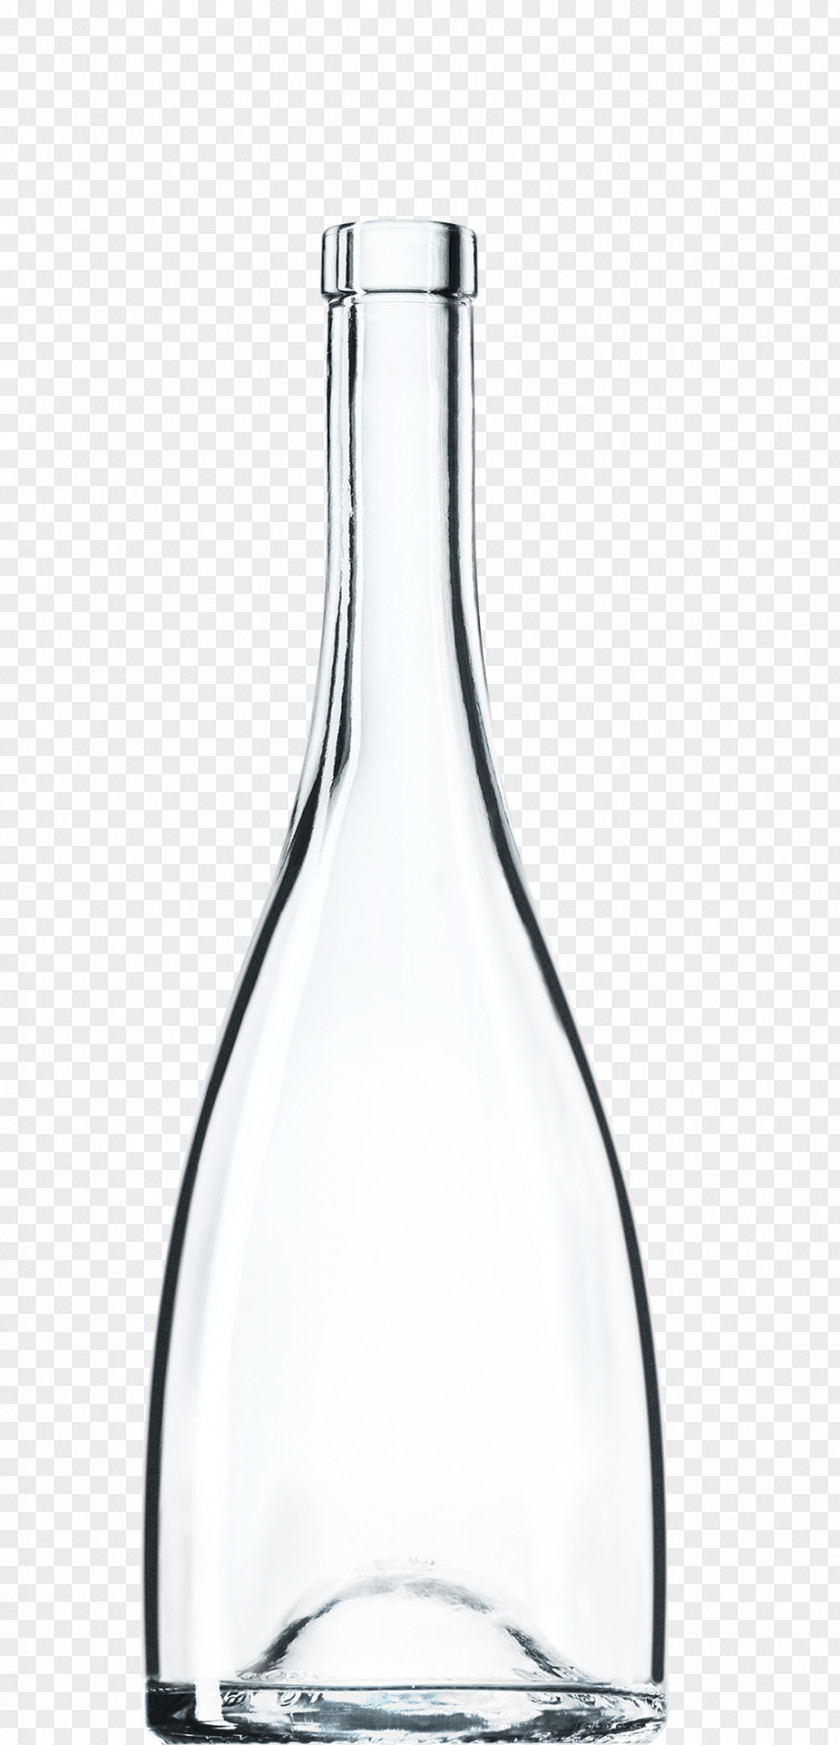 Glass Water Bottle Decanter Tableware PNG